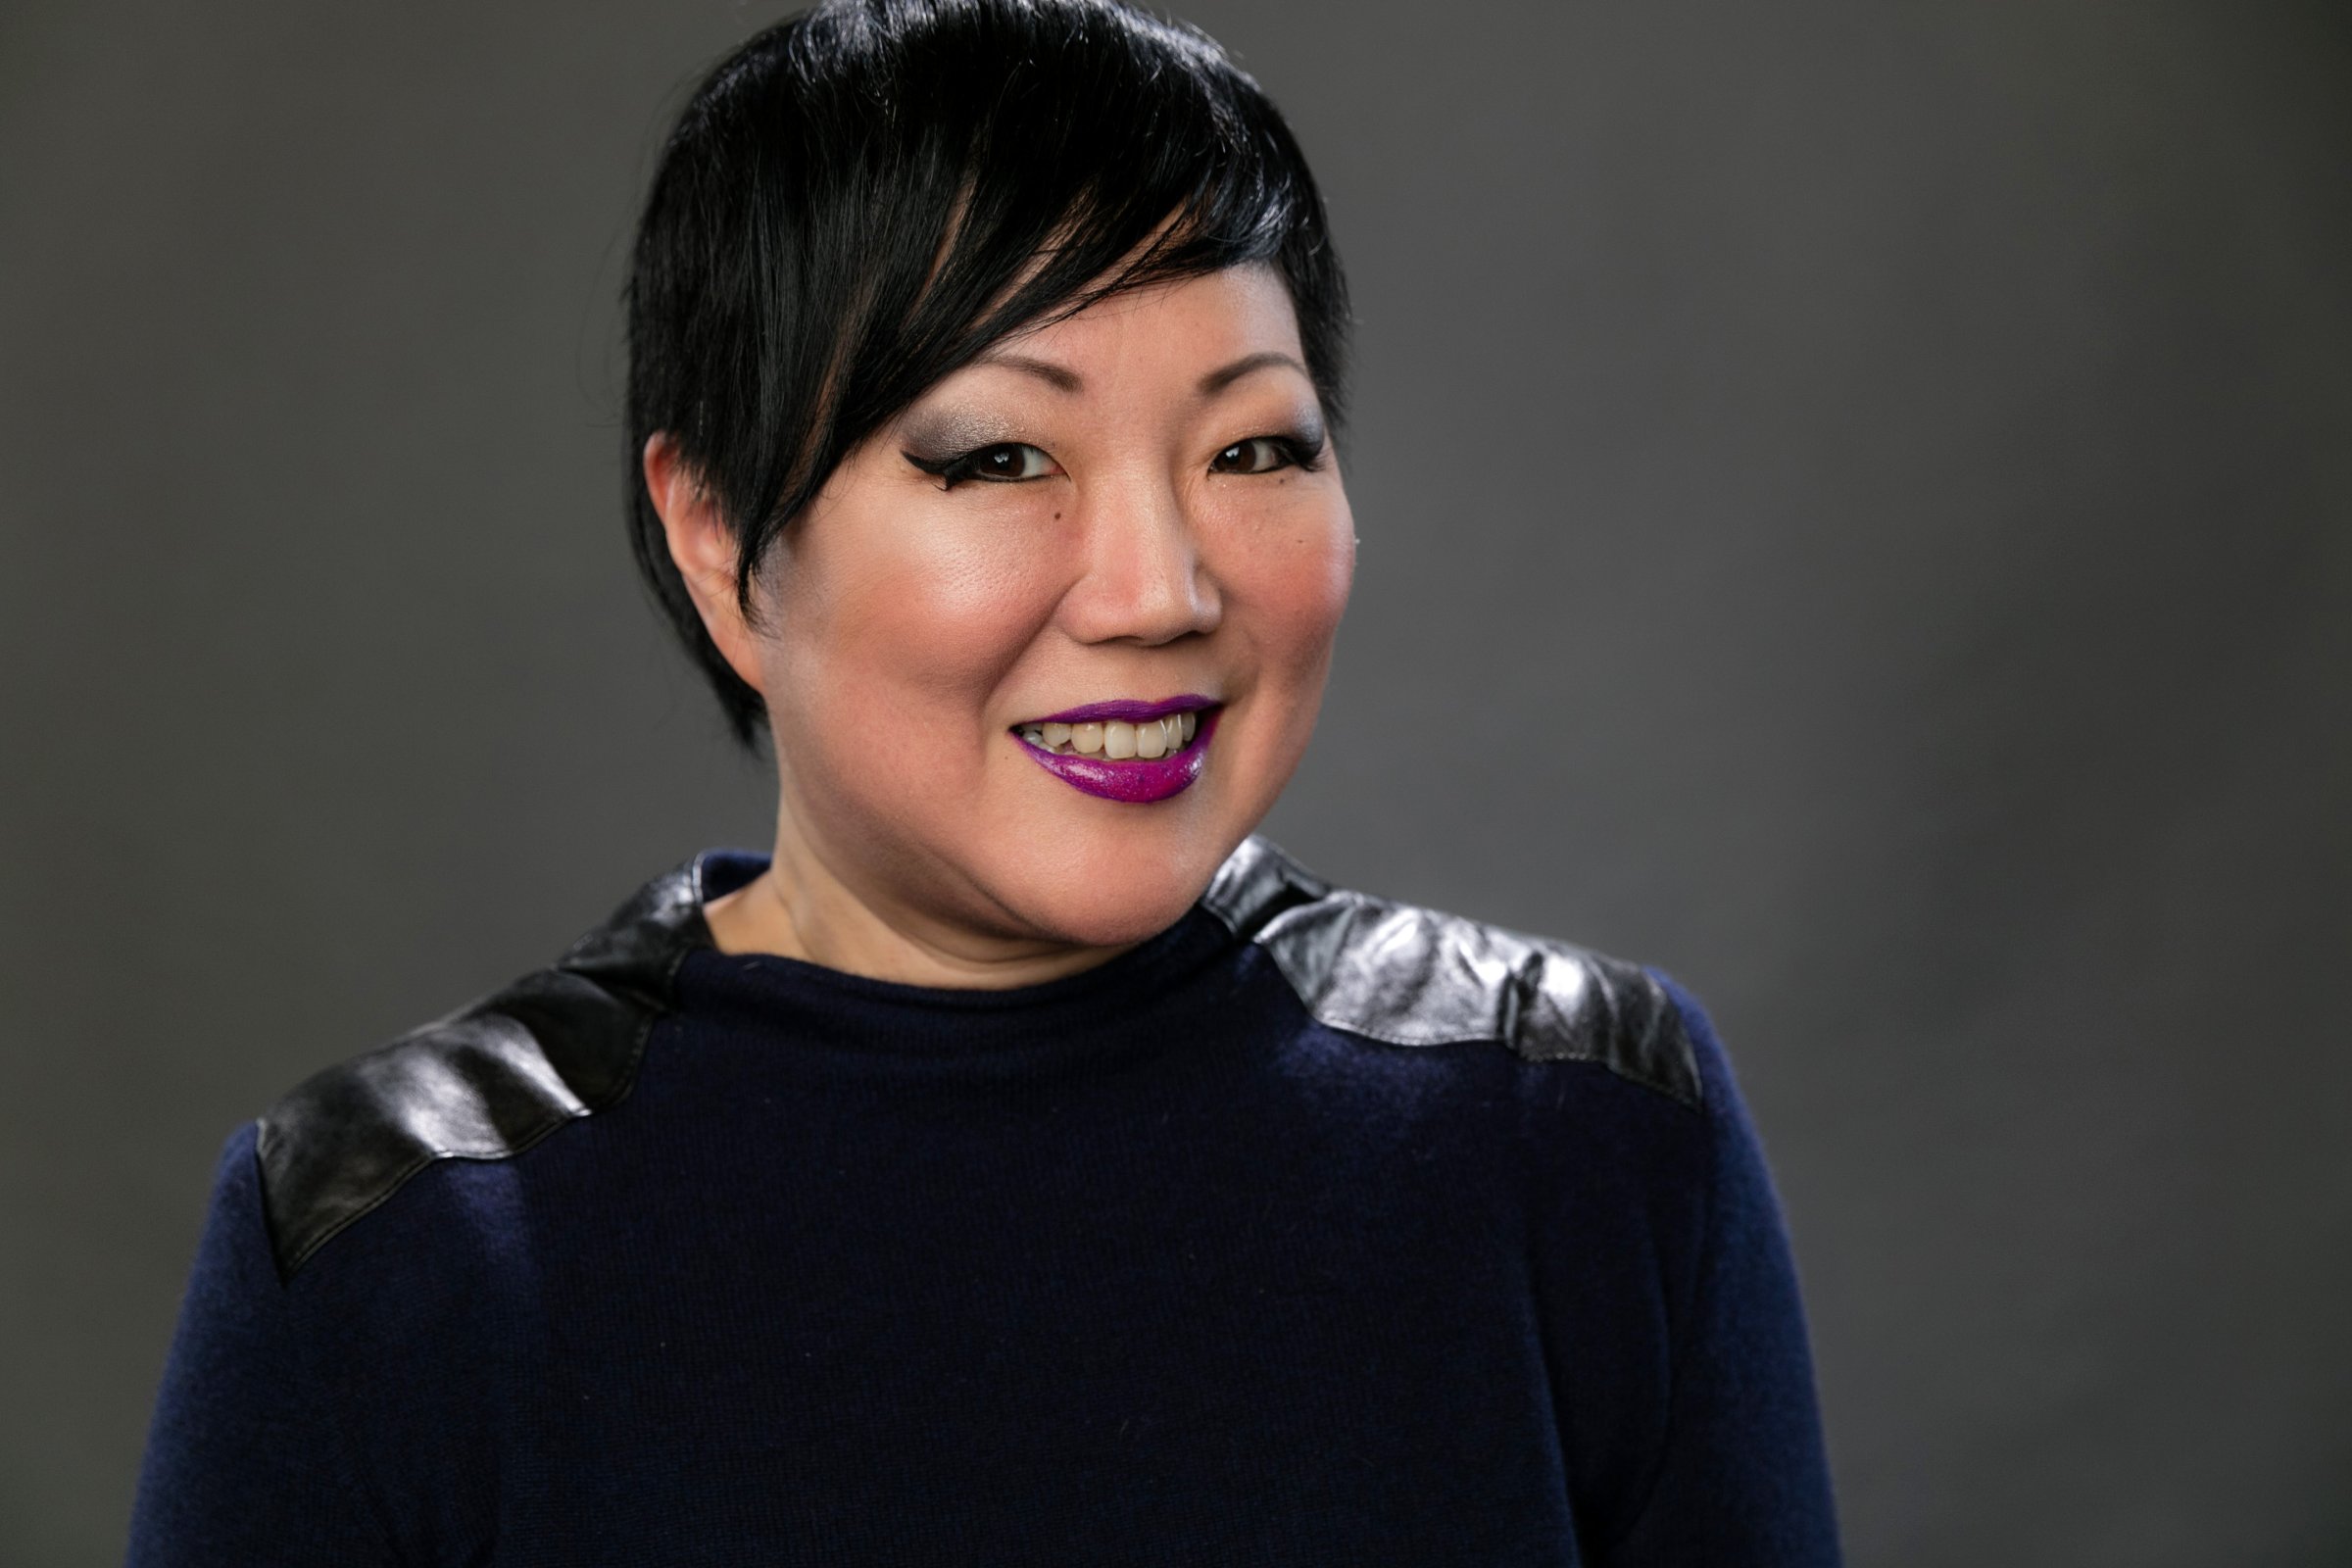 Comedian Margaret Cho poses for a portrait during the NBCUniversal Press Day at The Langham Huntington, Pasadena on January 14, 2016 in Pasadena, California.